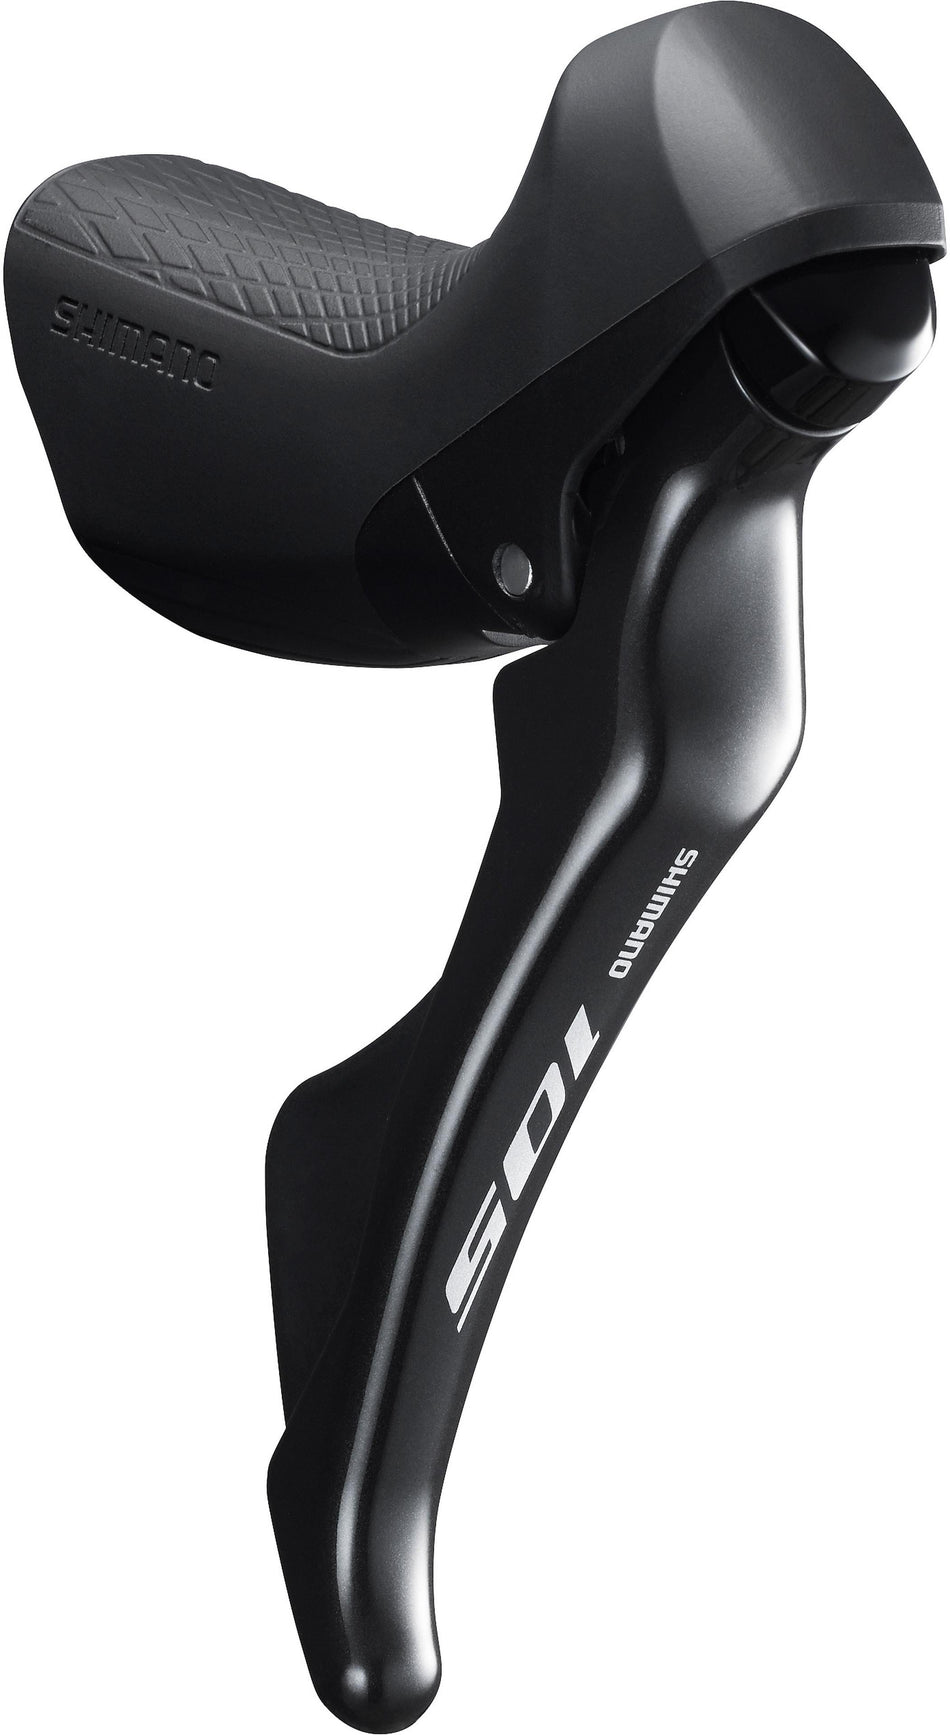 Shimano 105 R7000 11 Speed Levers